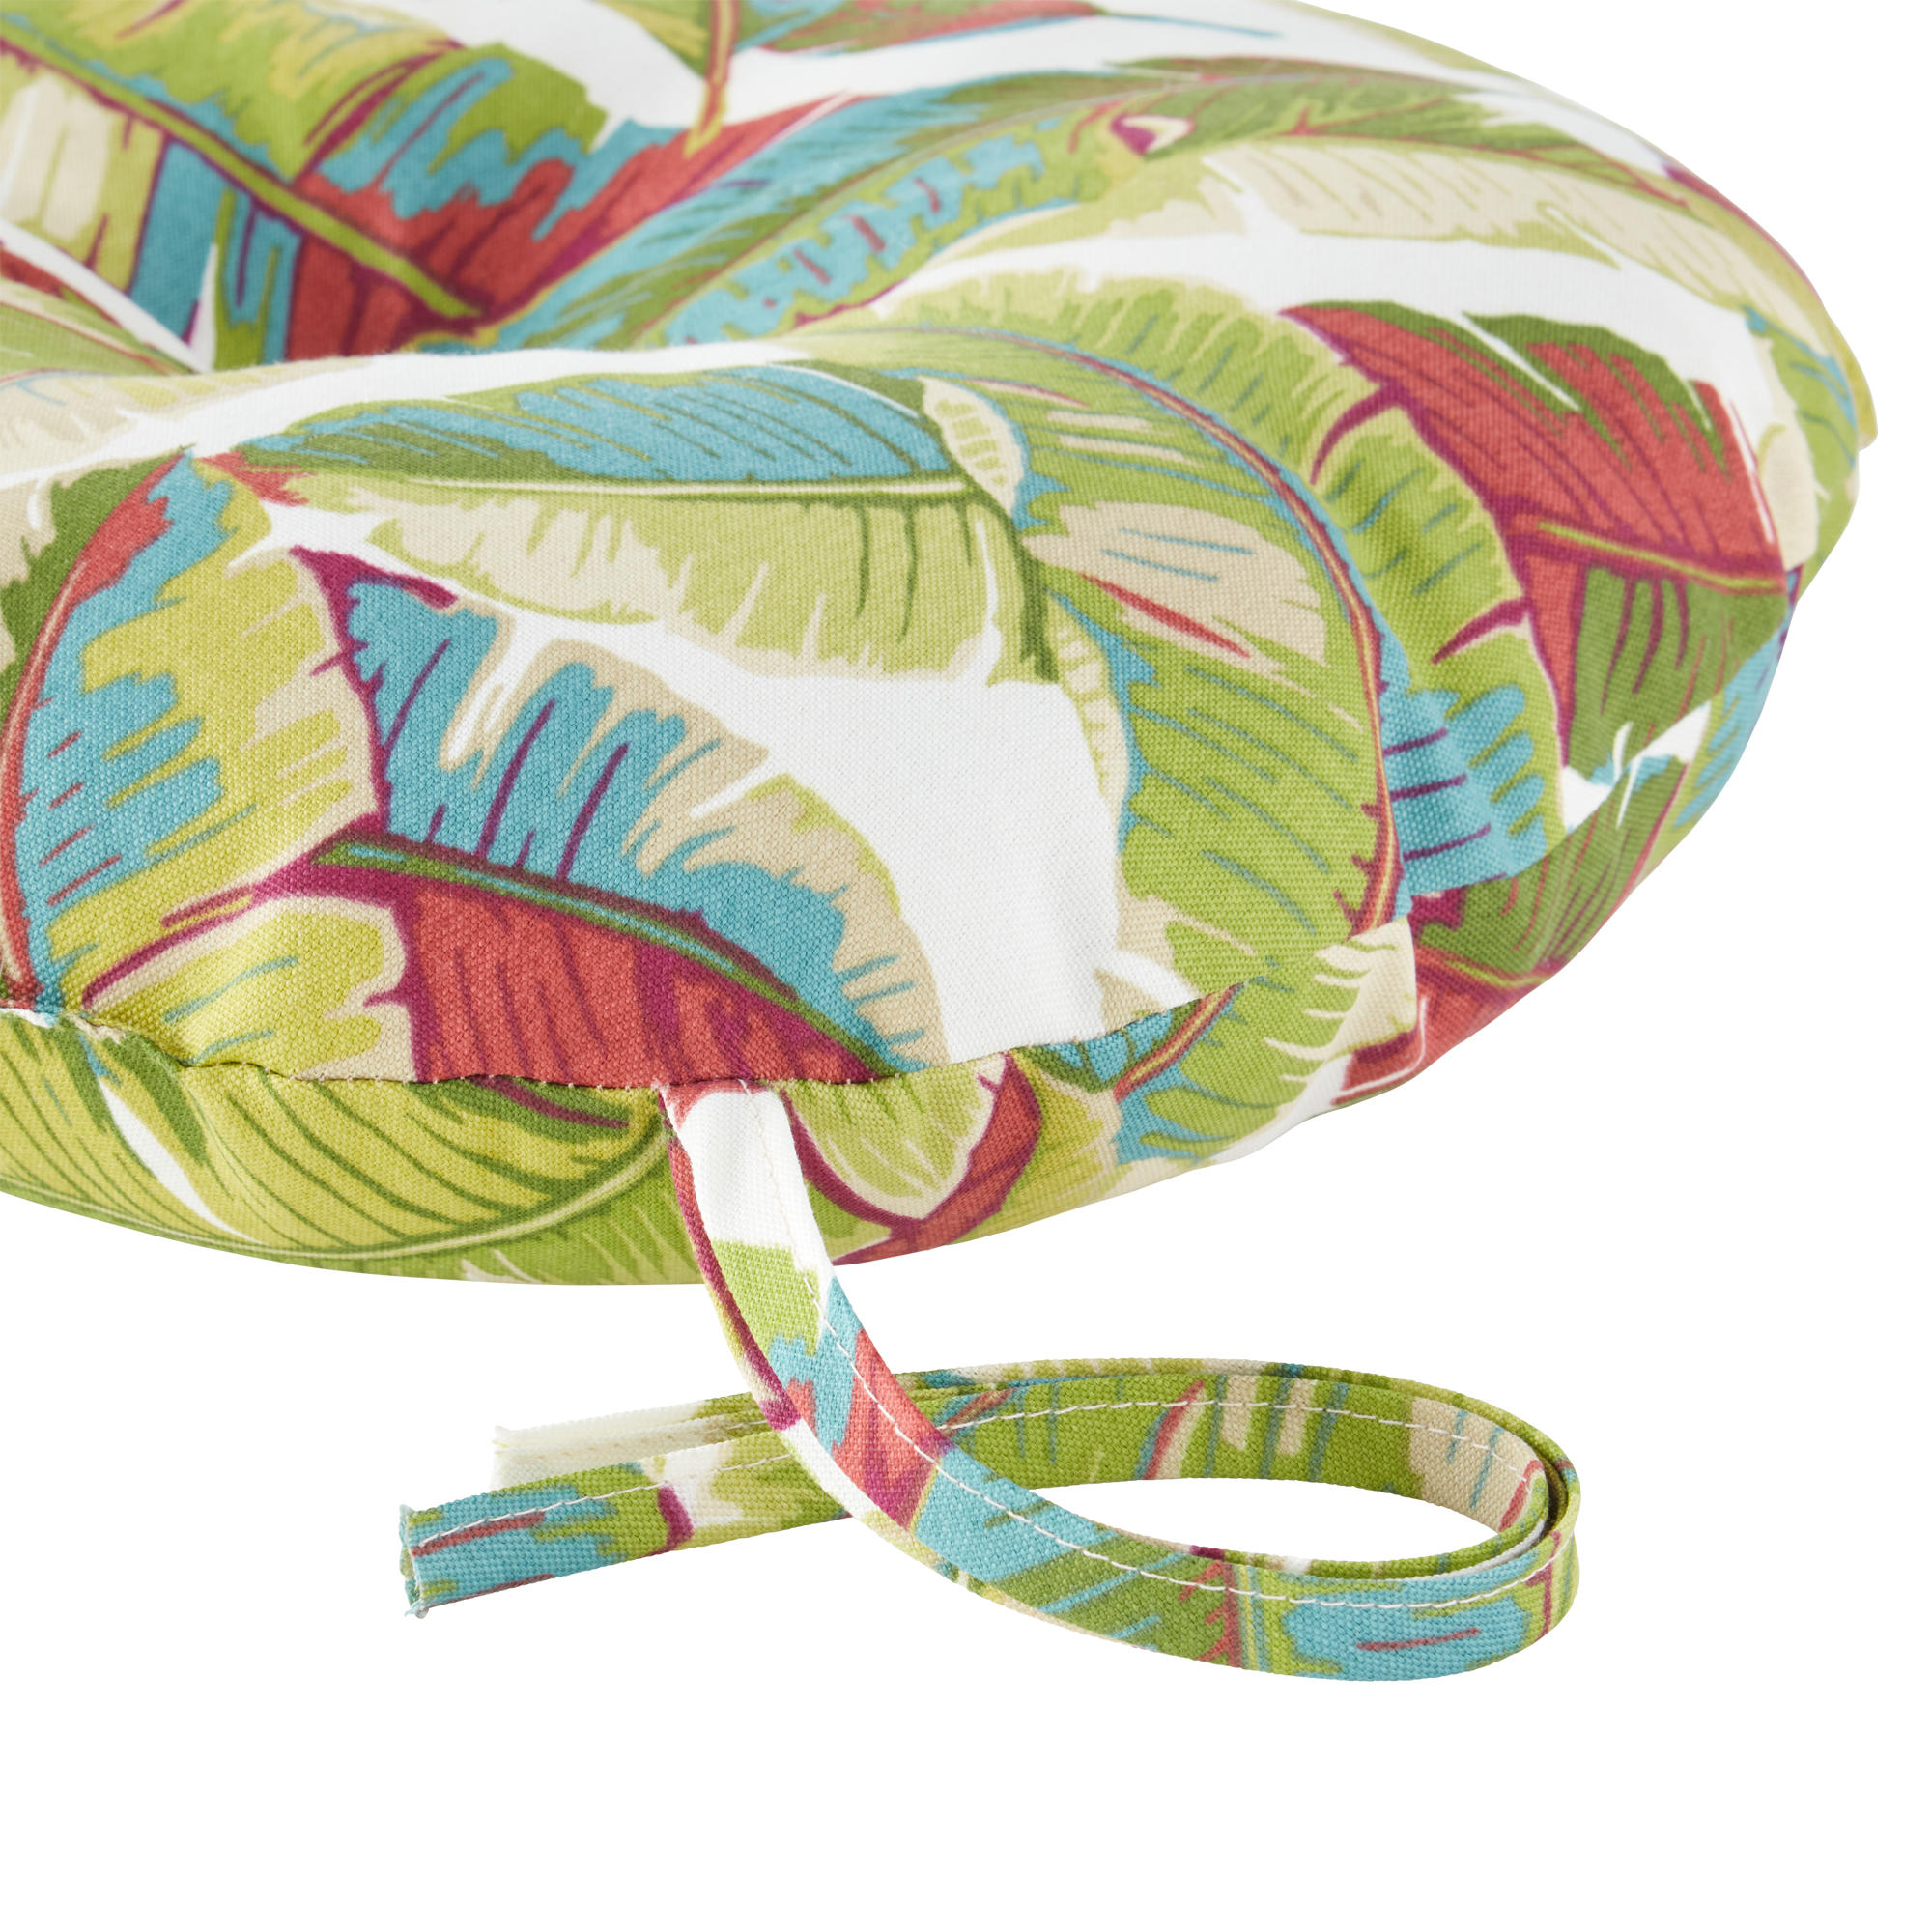 Greendale Home Fashions Palm Leaves Multicolor 15 in. Round Outdoor Reversible Bistro Seat Cushion (Set of 2) - image 3 of 5